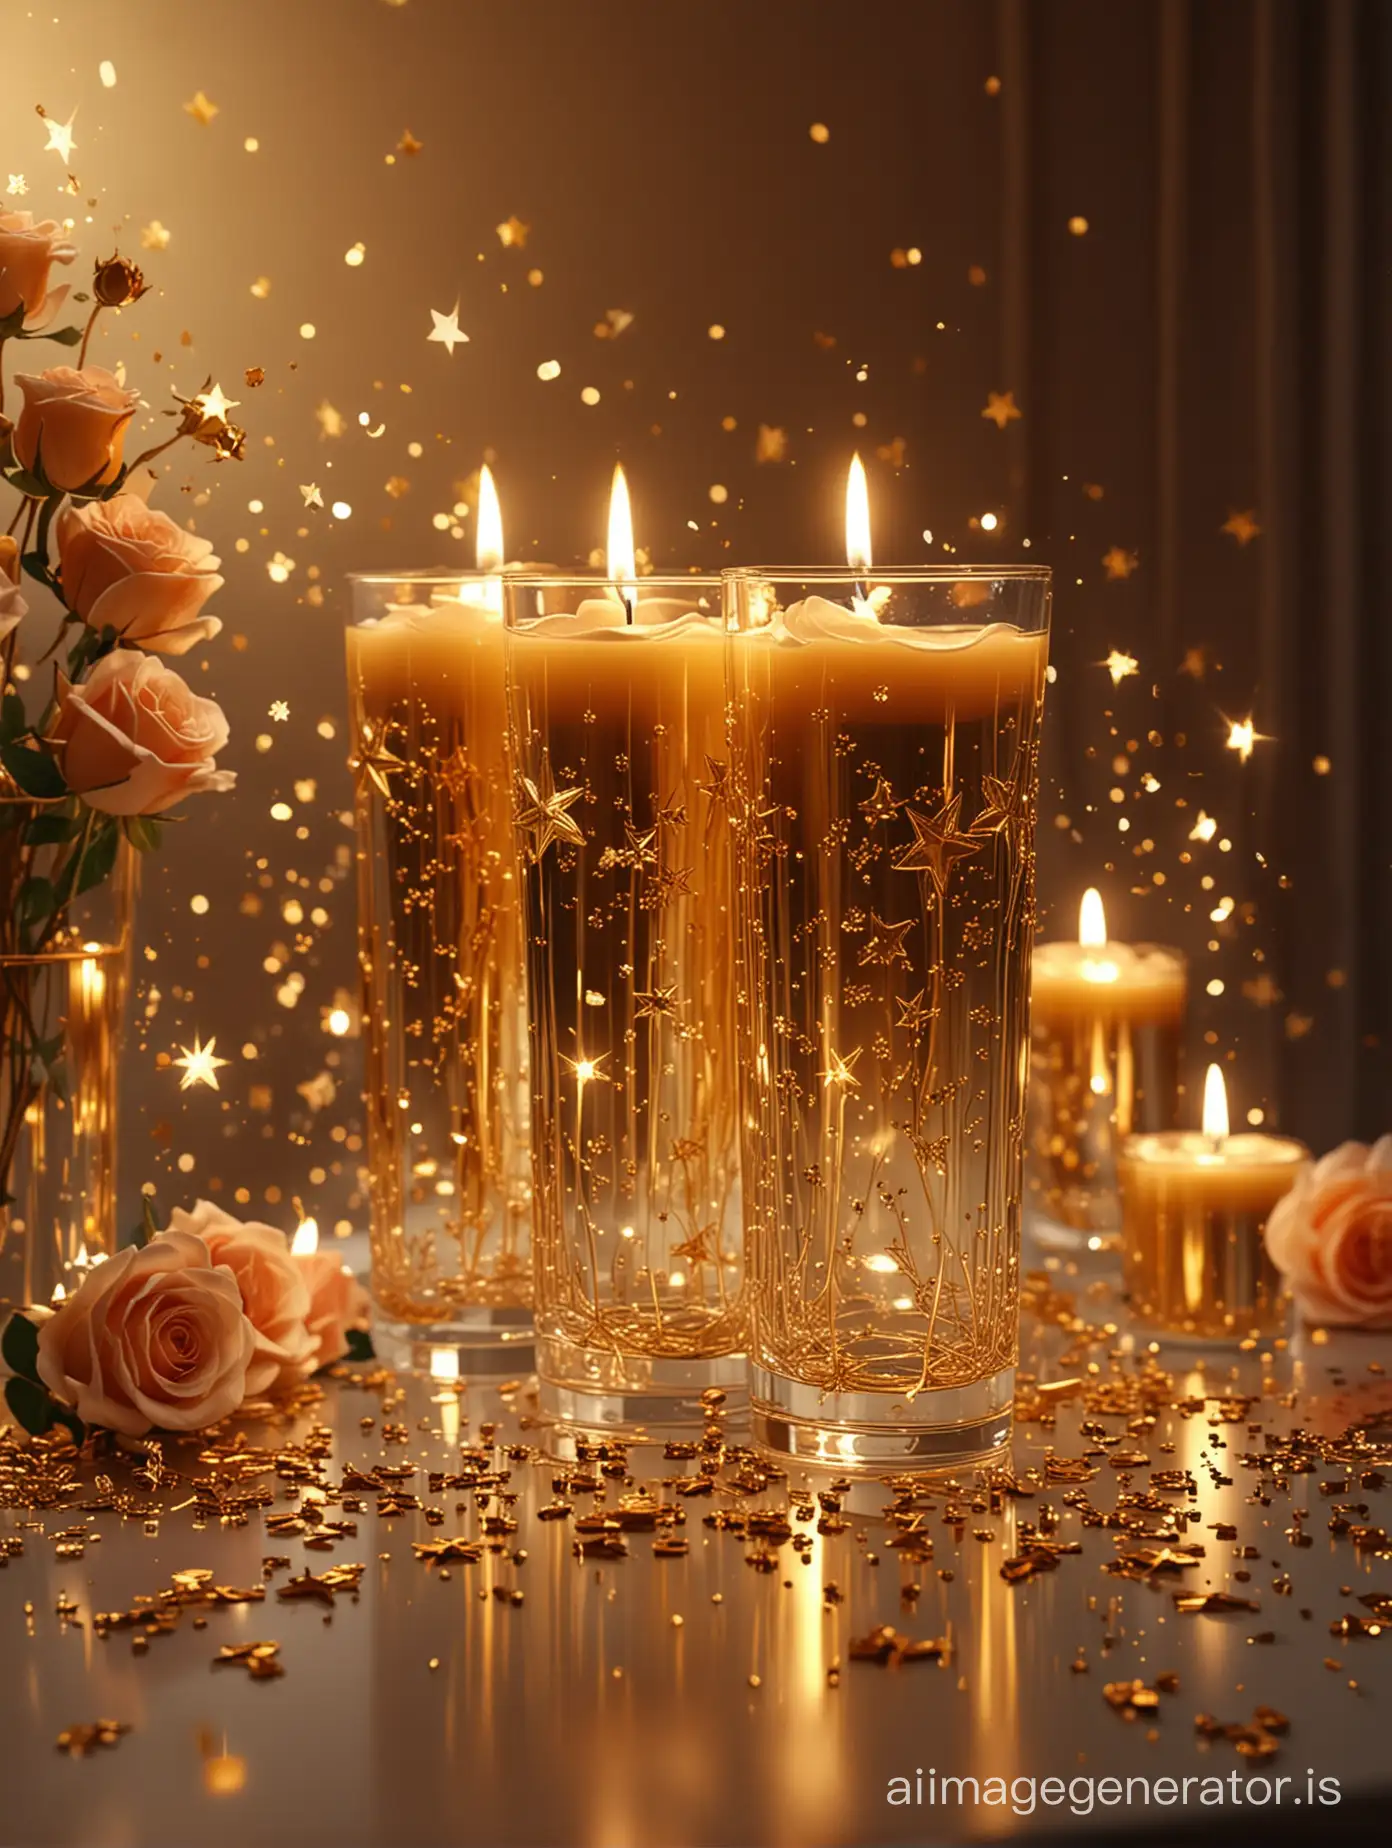 Luxurious-Golden-Candle-Arrangement-with-Stars-on-Mirror-Surface